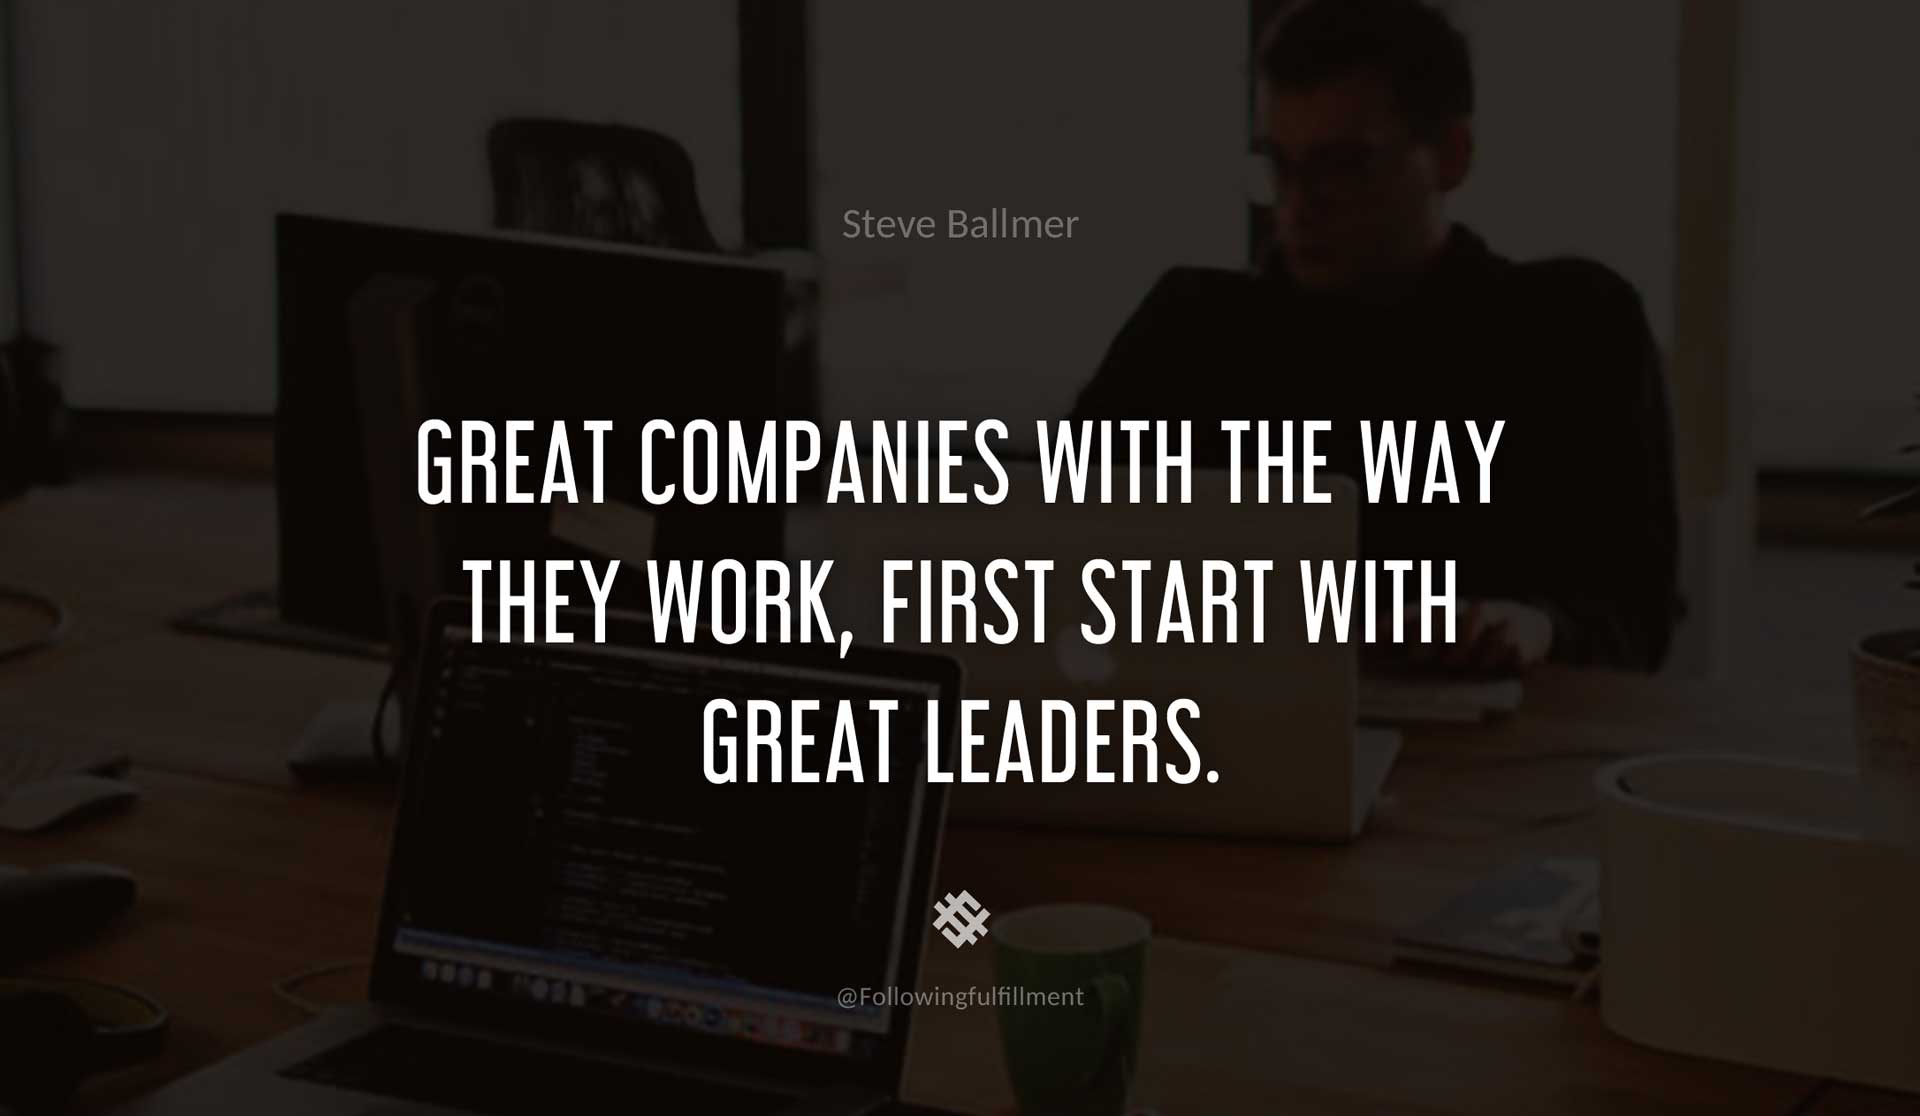 Great-companies-with-the-way-they-work,-first-start-with-great-leaders.-STEVE-BALLMER-Quote.jpg